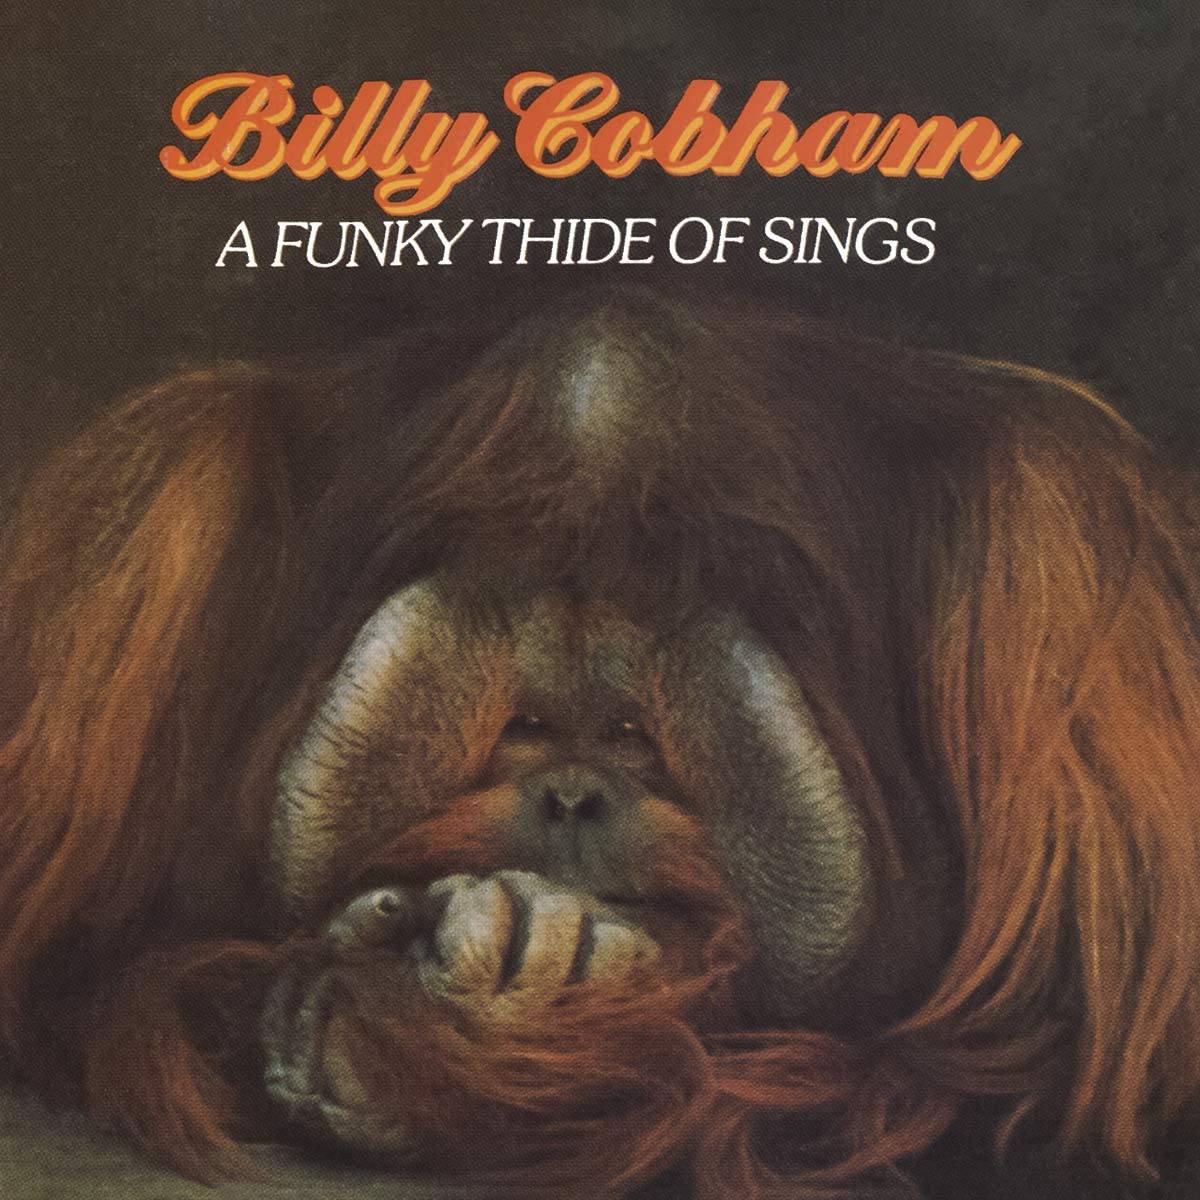 CD - Billy Cobham - A Funky Thide Of Sings